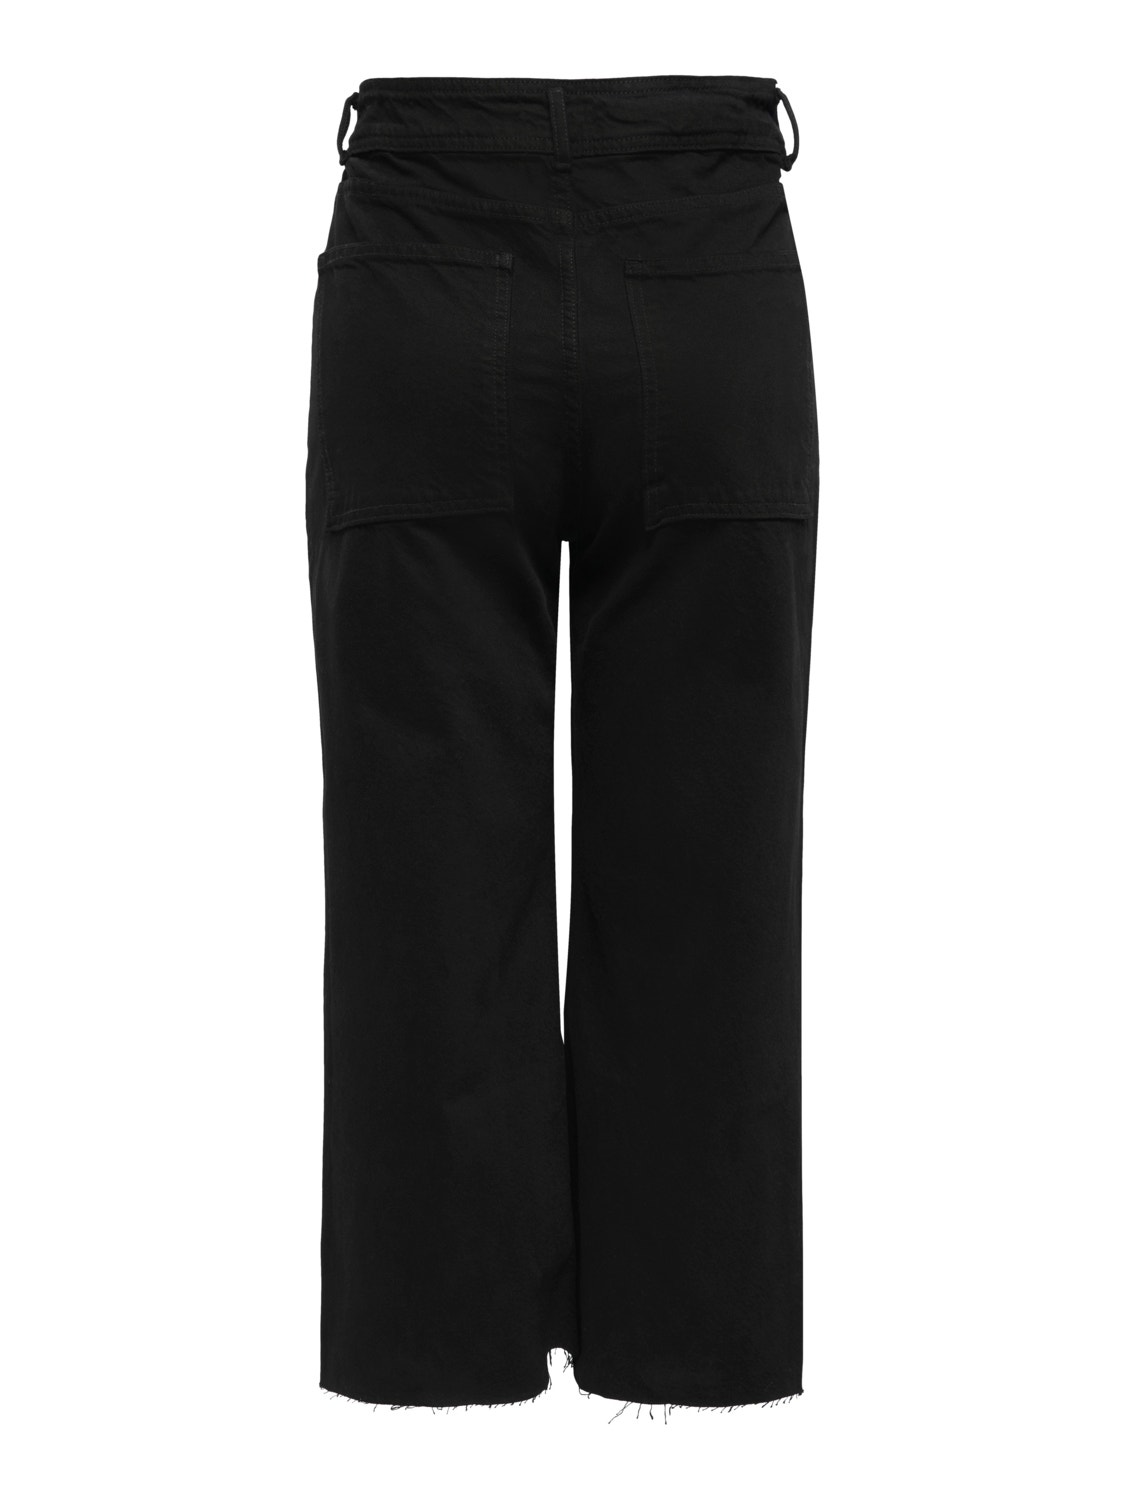 ONLY Gerade geschnitten Hohe Taille Jeans -Black - 15253400